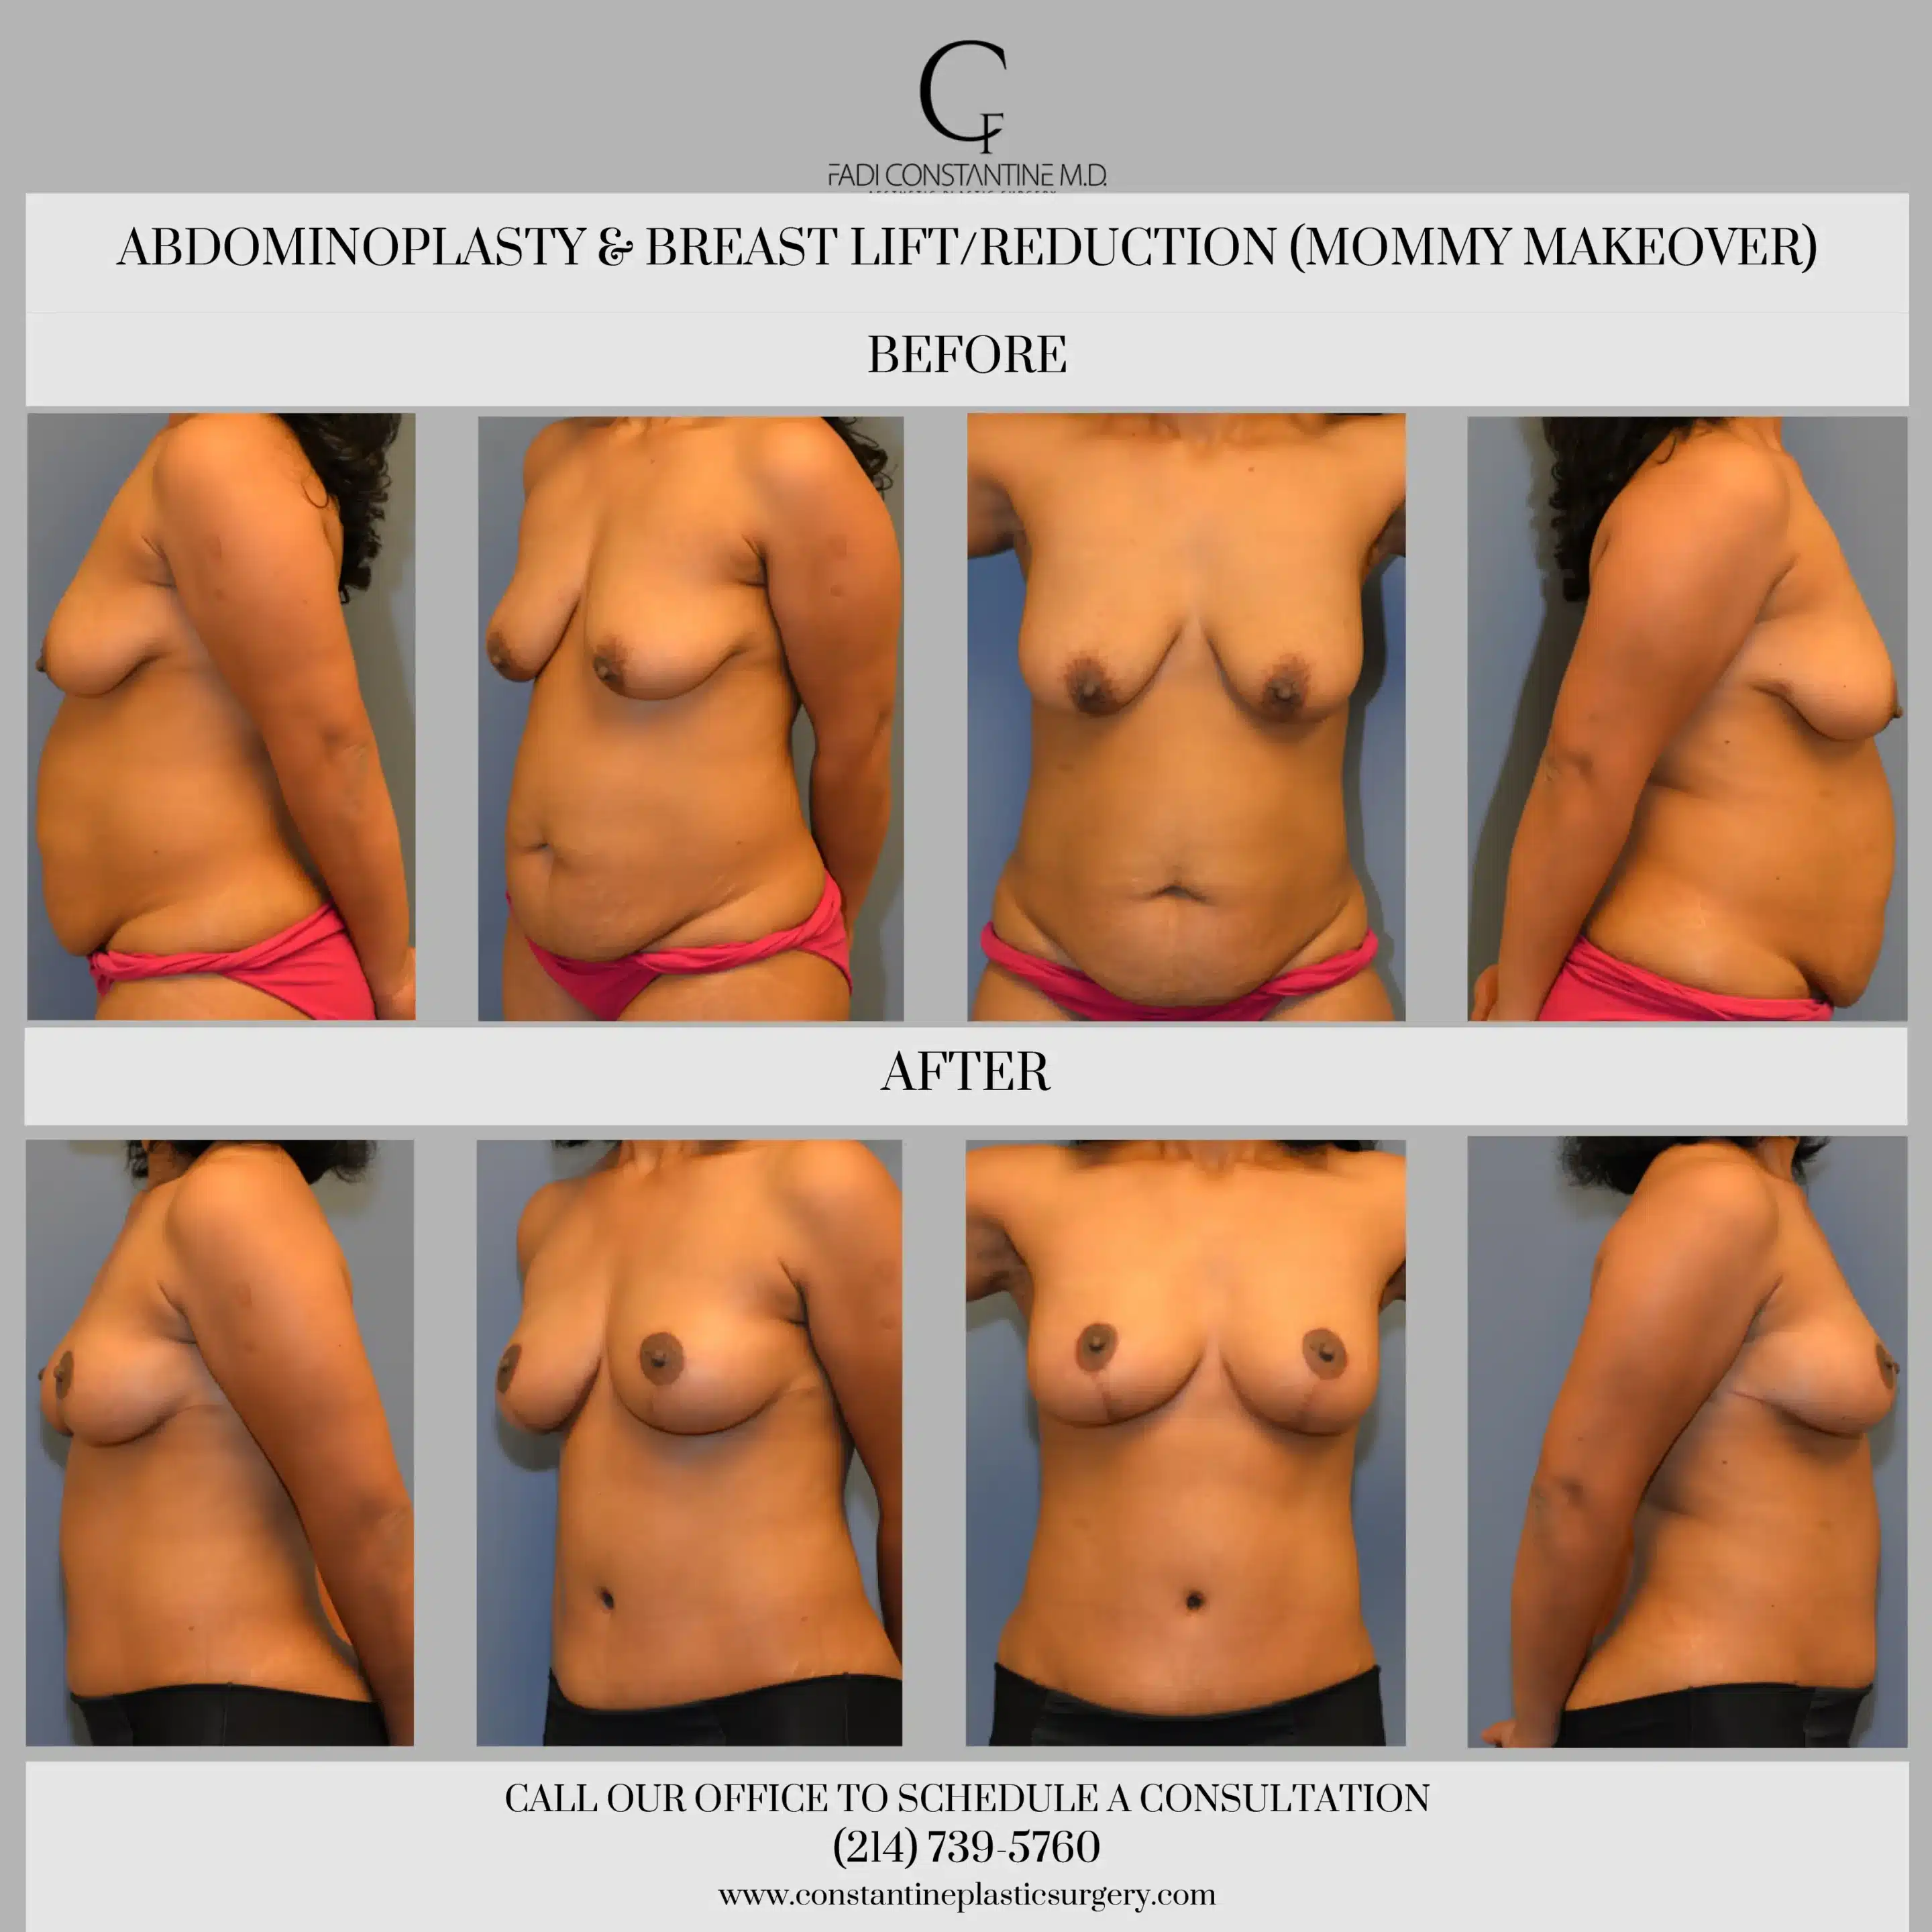 Breast Reduction - Insurance vs. Cosmetic Surgery - Capizzi MD